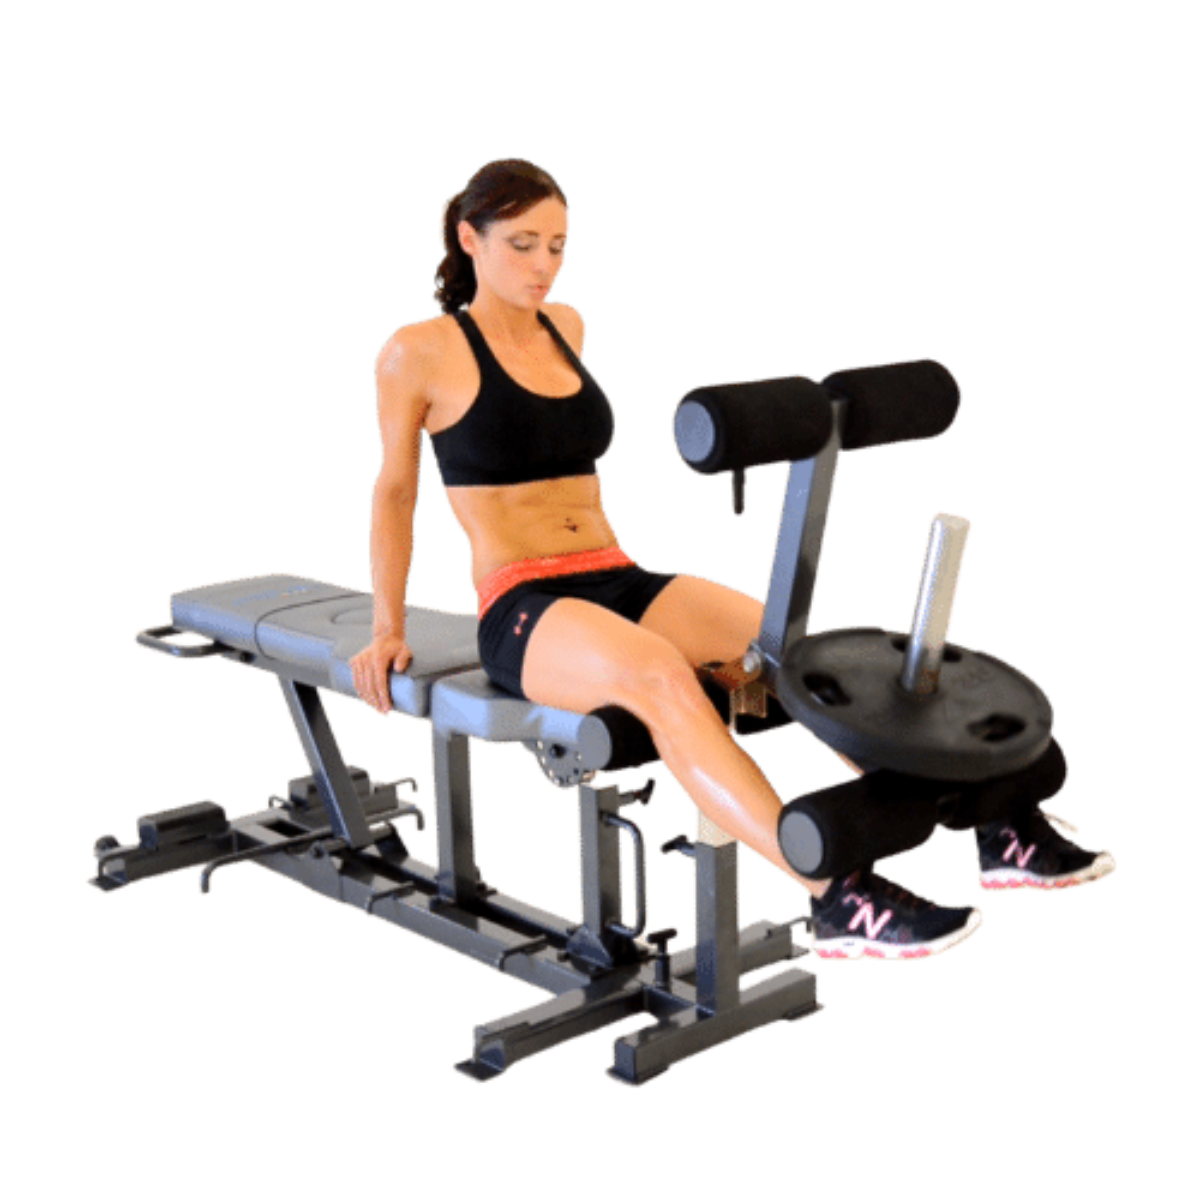 The Core Bench Transforms Into 12 Different Piece Of Equipment &  Provides Over 60 Exercises.  Let Your Imagination And The Core Bench Customize Your Full-Body Exercise Program Today!